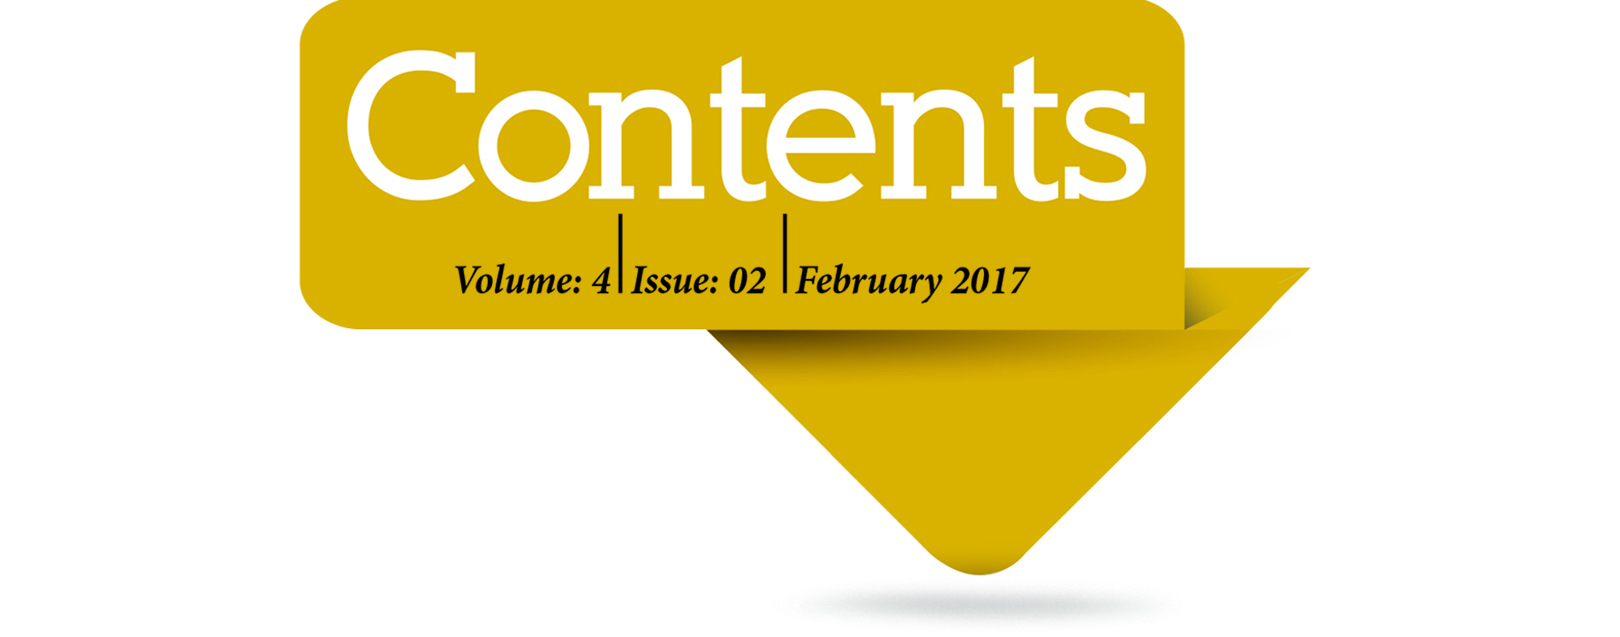 Contents February 2017 March 2018 issue